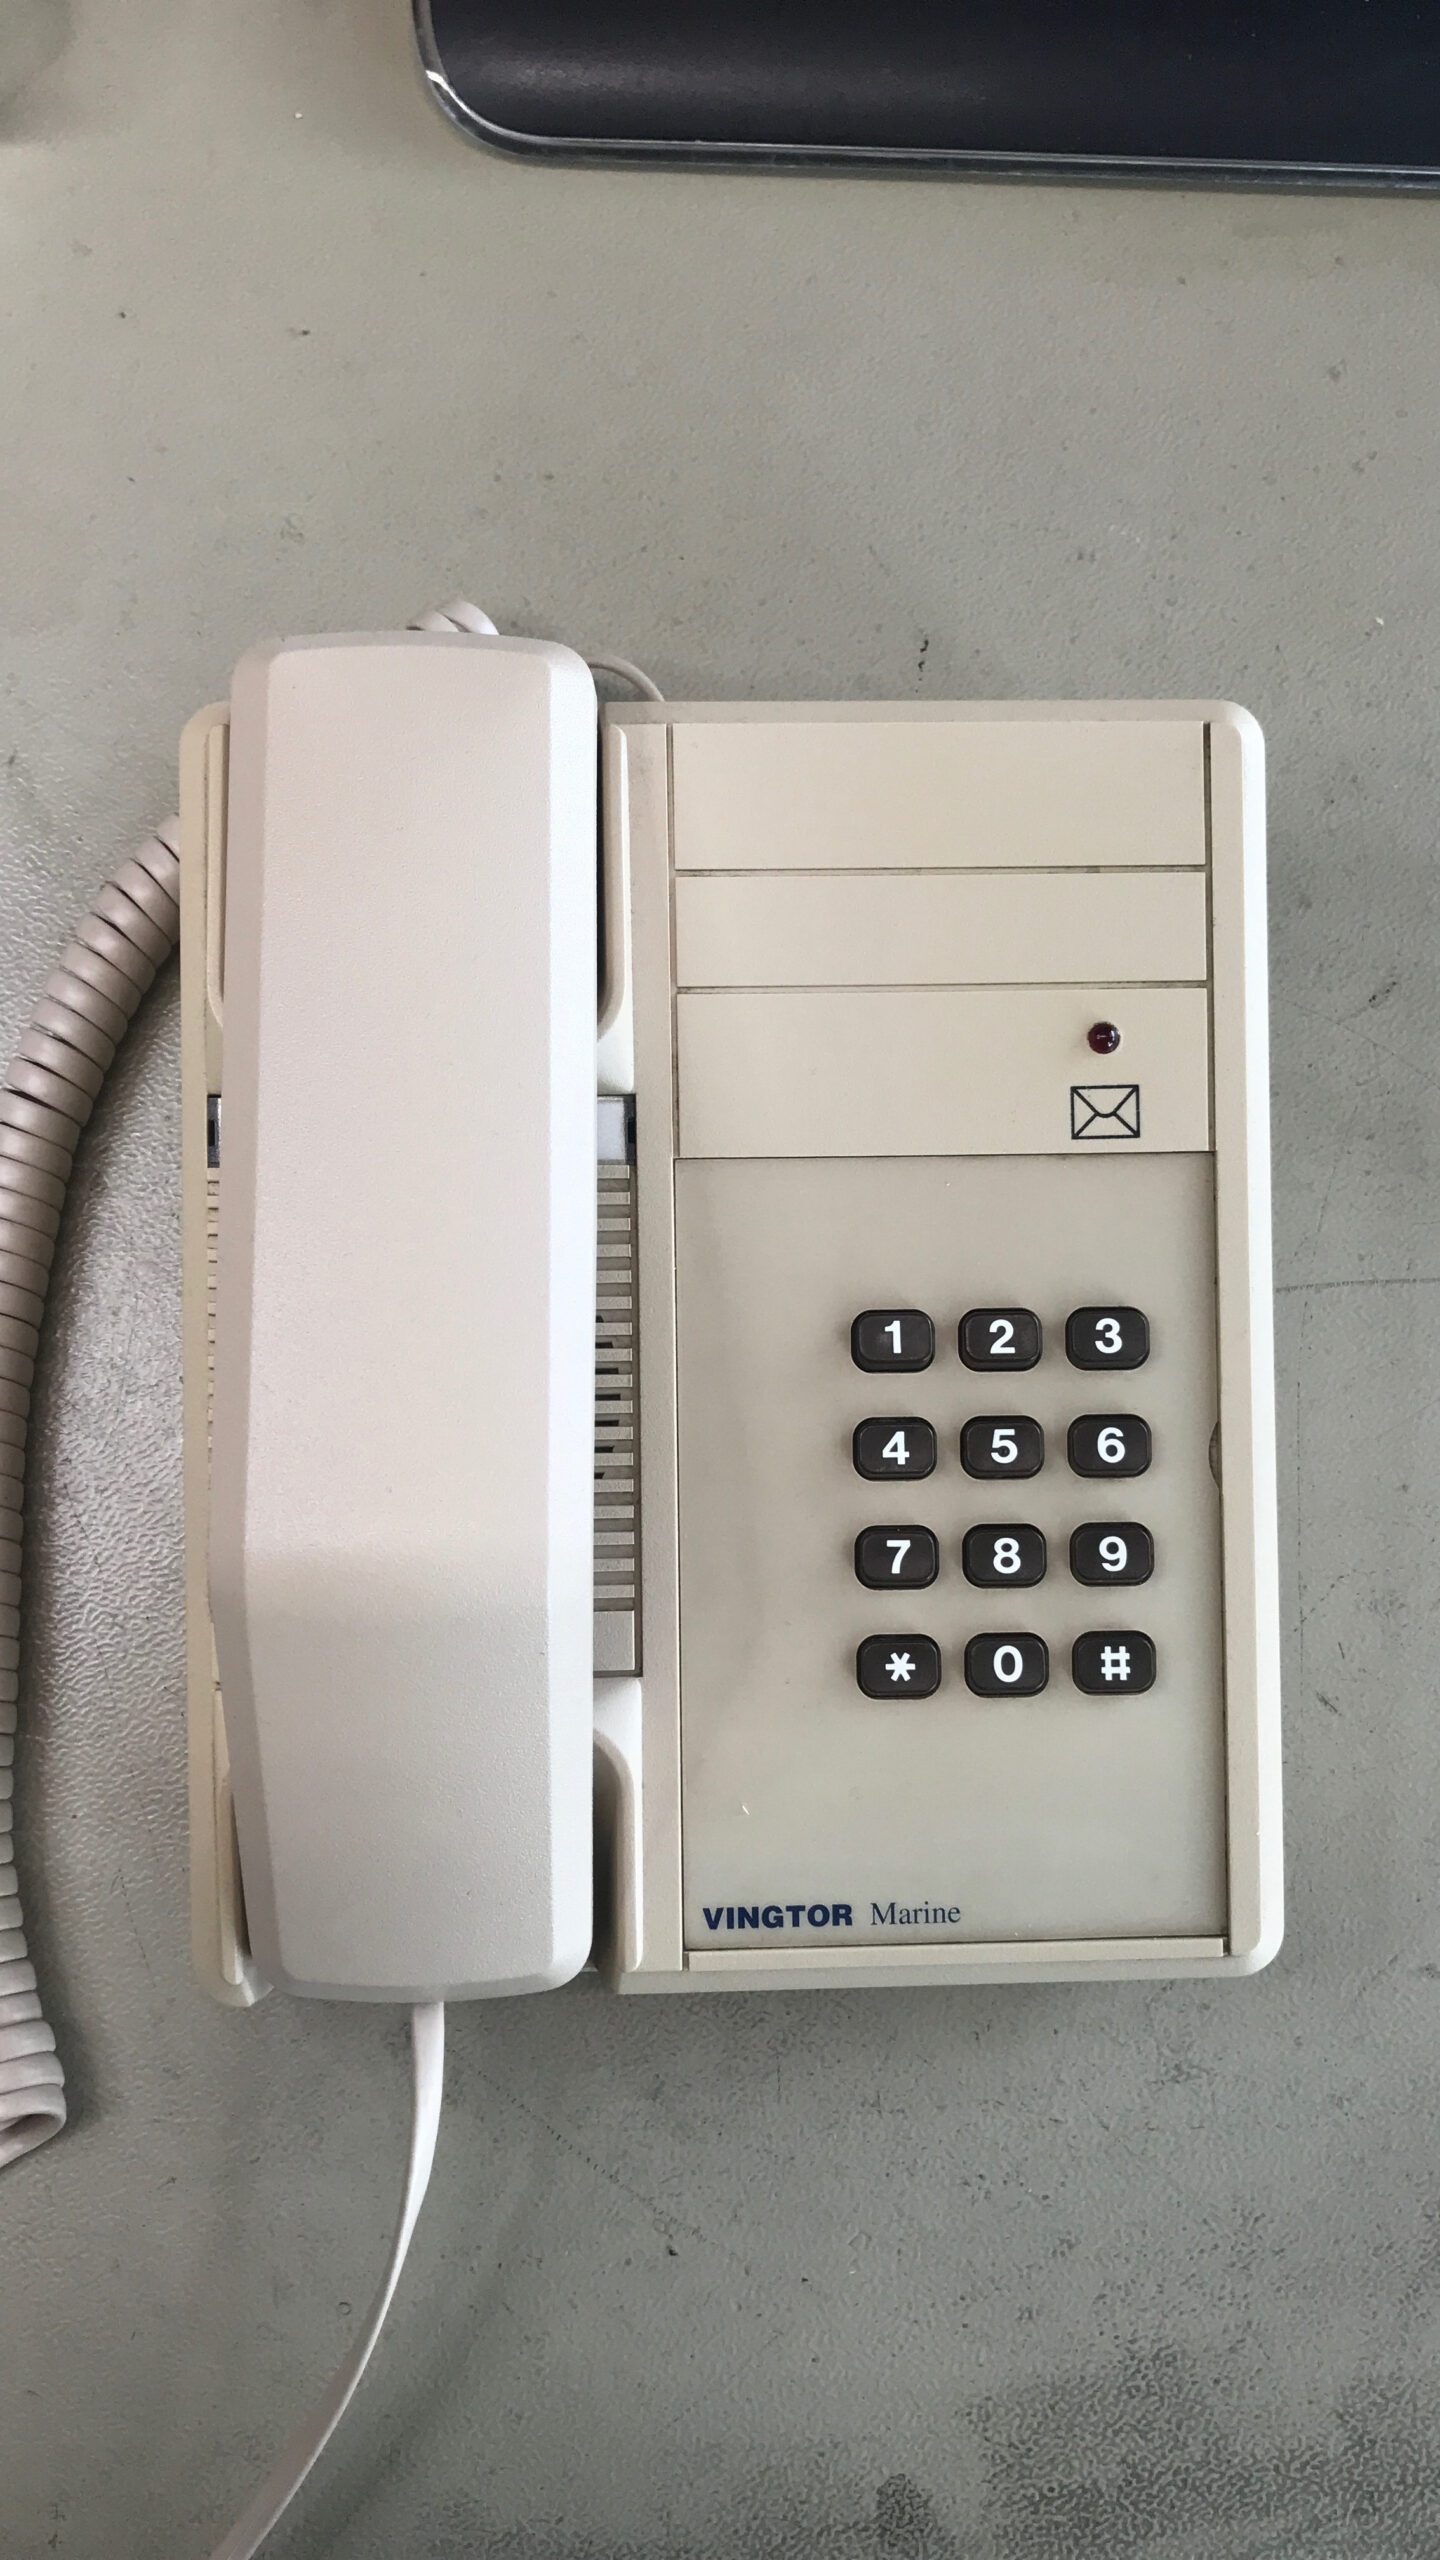 You are currently viewing Vingtor Marine / Steab Marine telephone